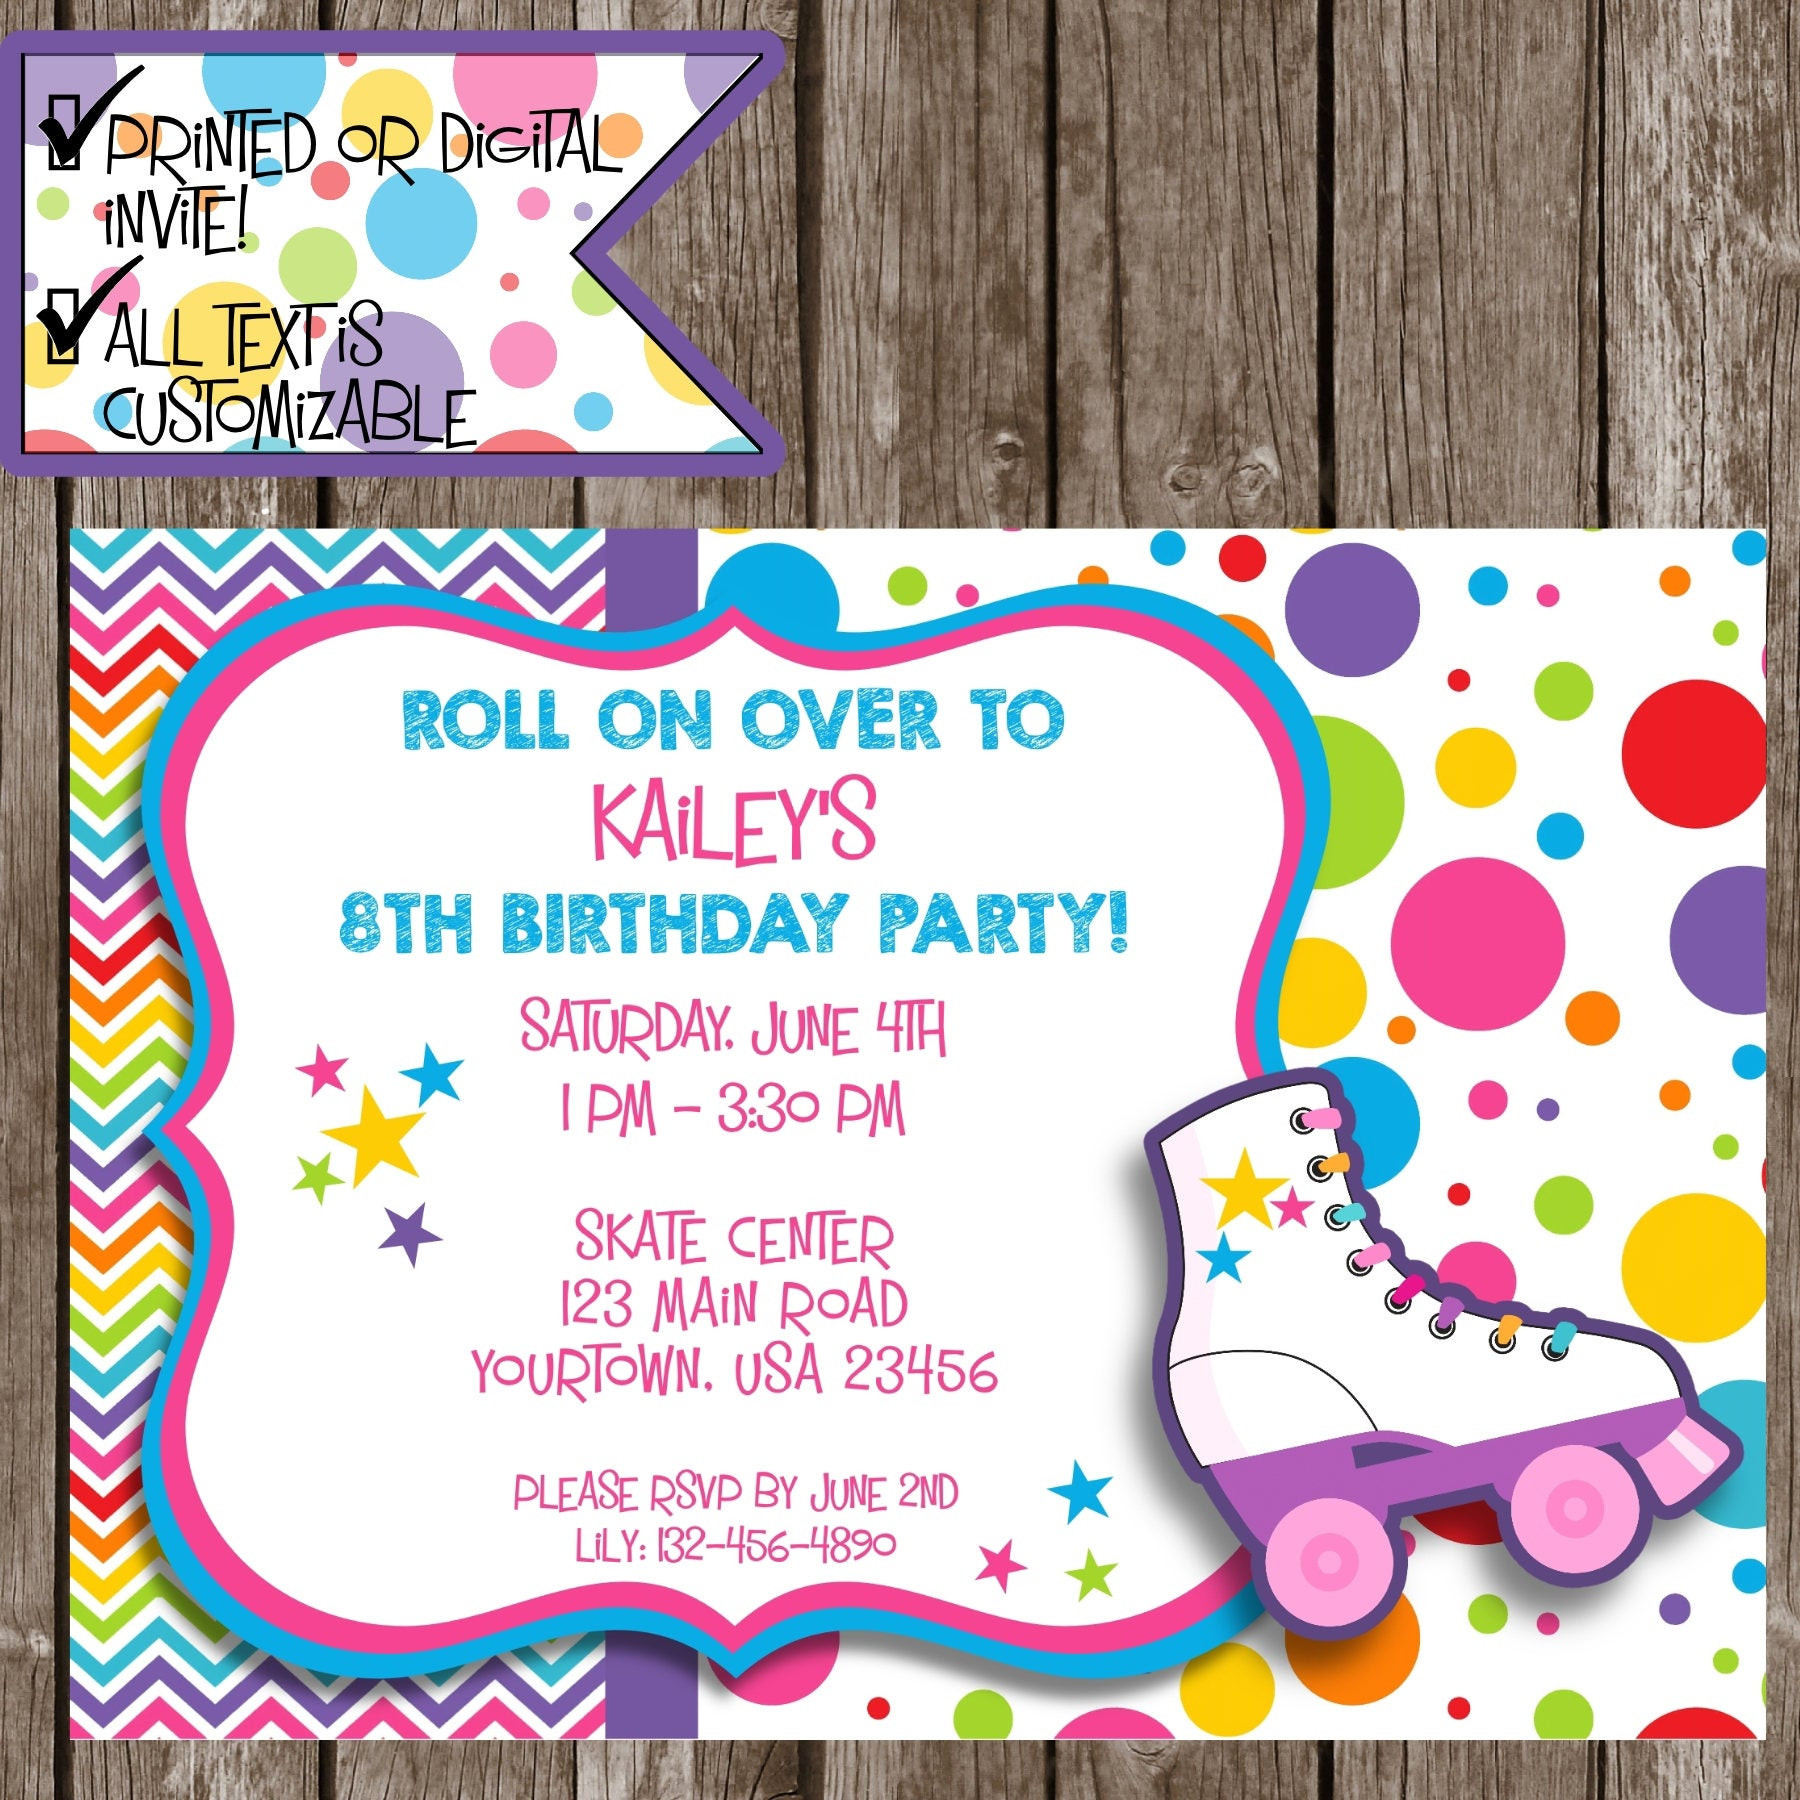 Roller Skating Birthday Party Invitations
 Roller Skating Invitation Roller Skating Party Skating party